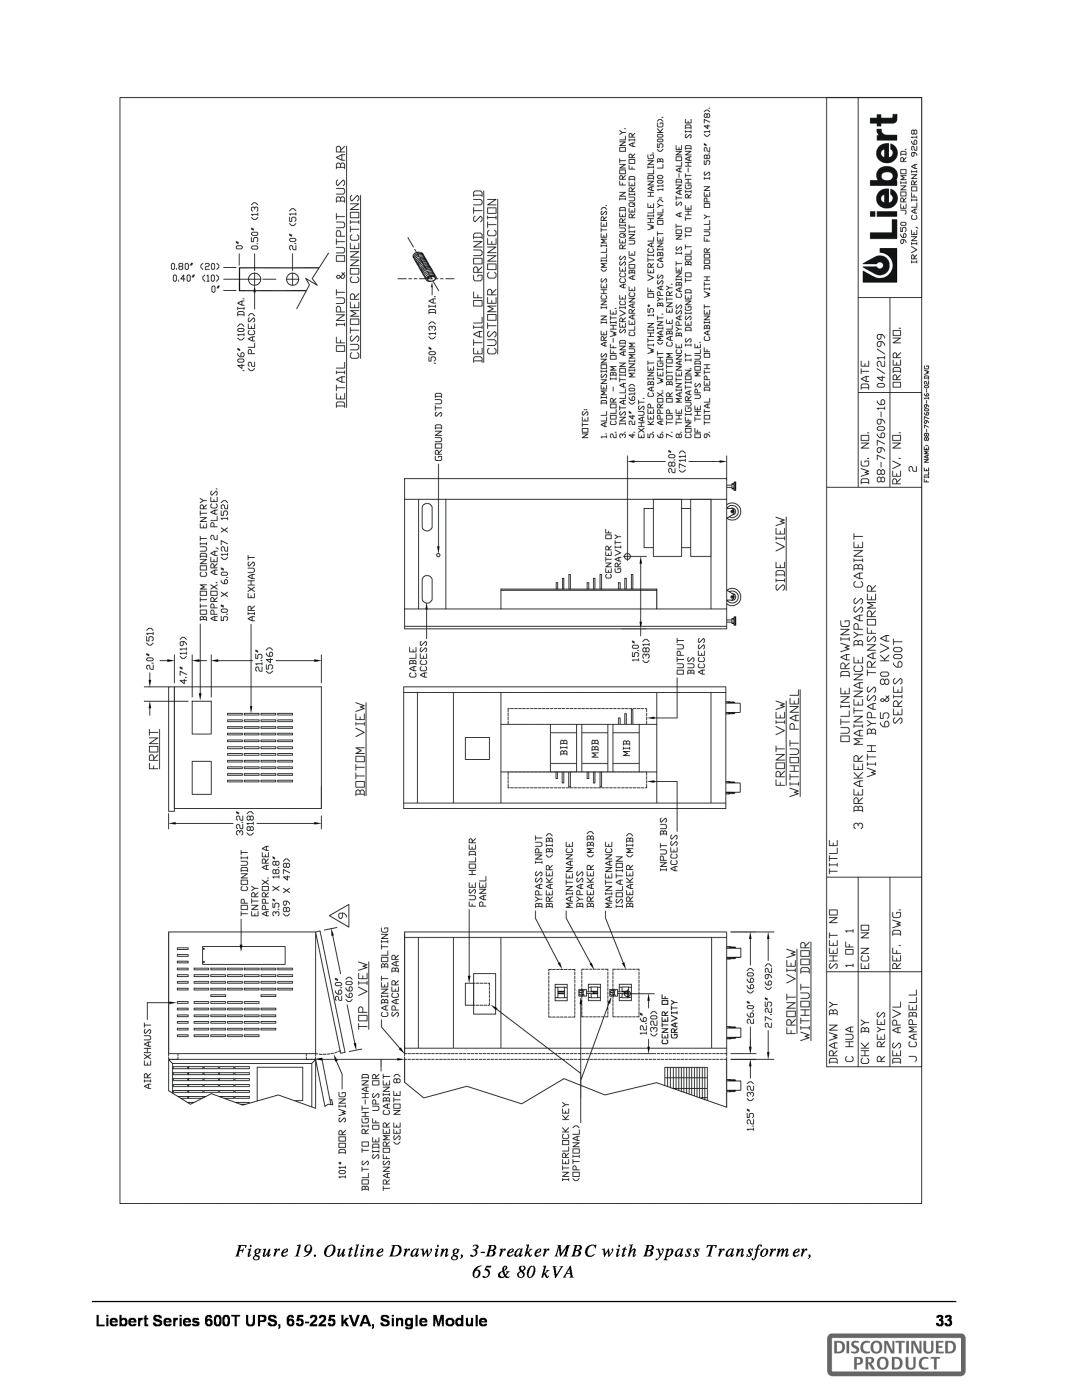 Emerson SERIES 600T manual Outline Drawing, 3-Breaker MBC with Bypass Transformer, 65 & 80 kVA, Discontinued Product 